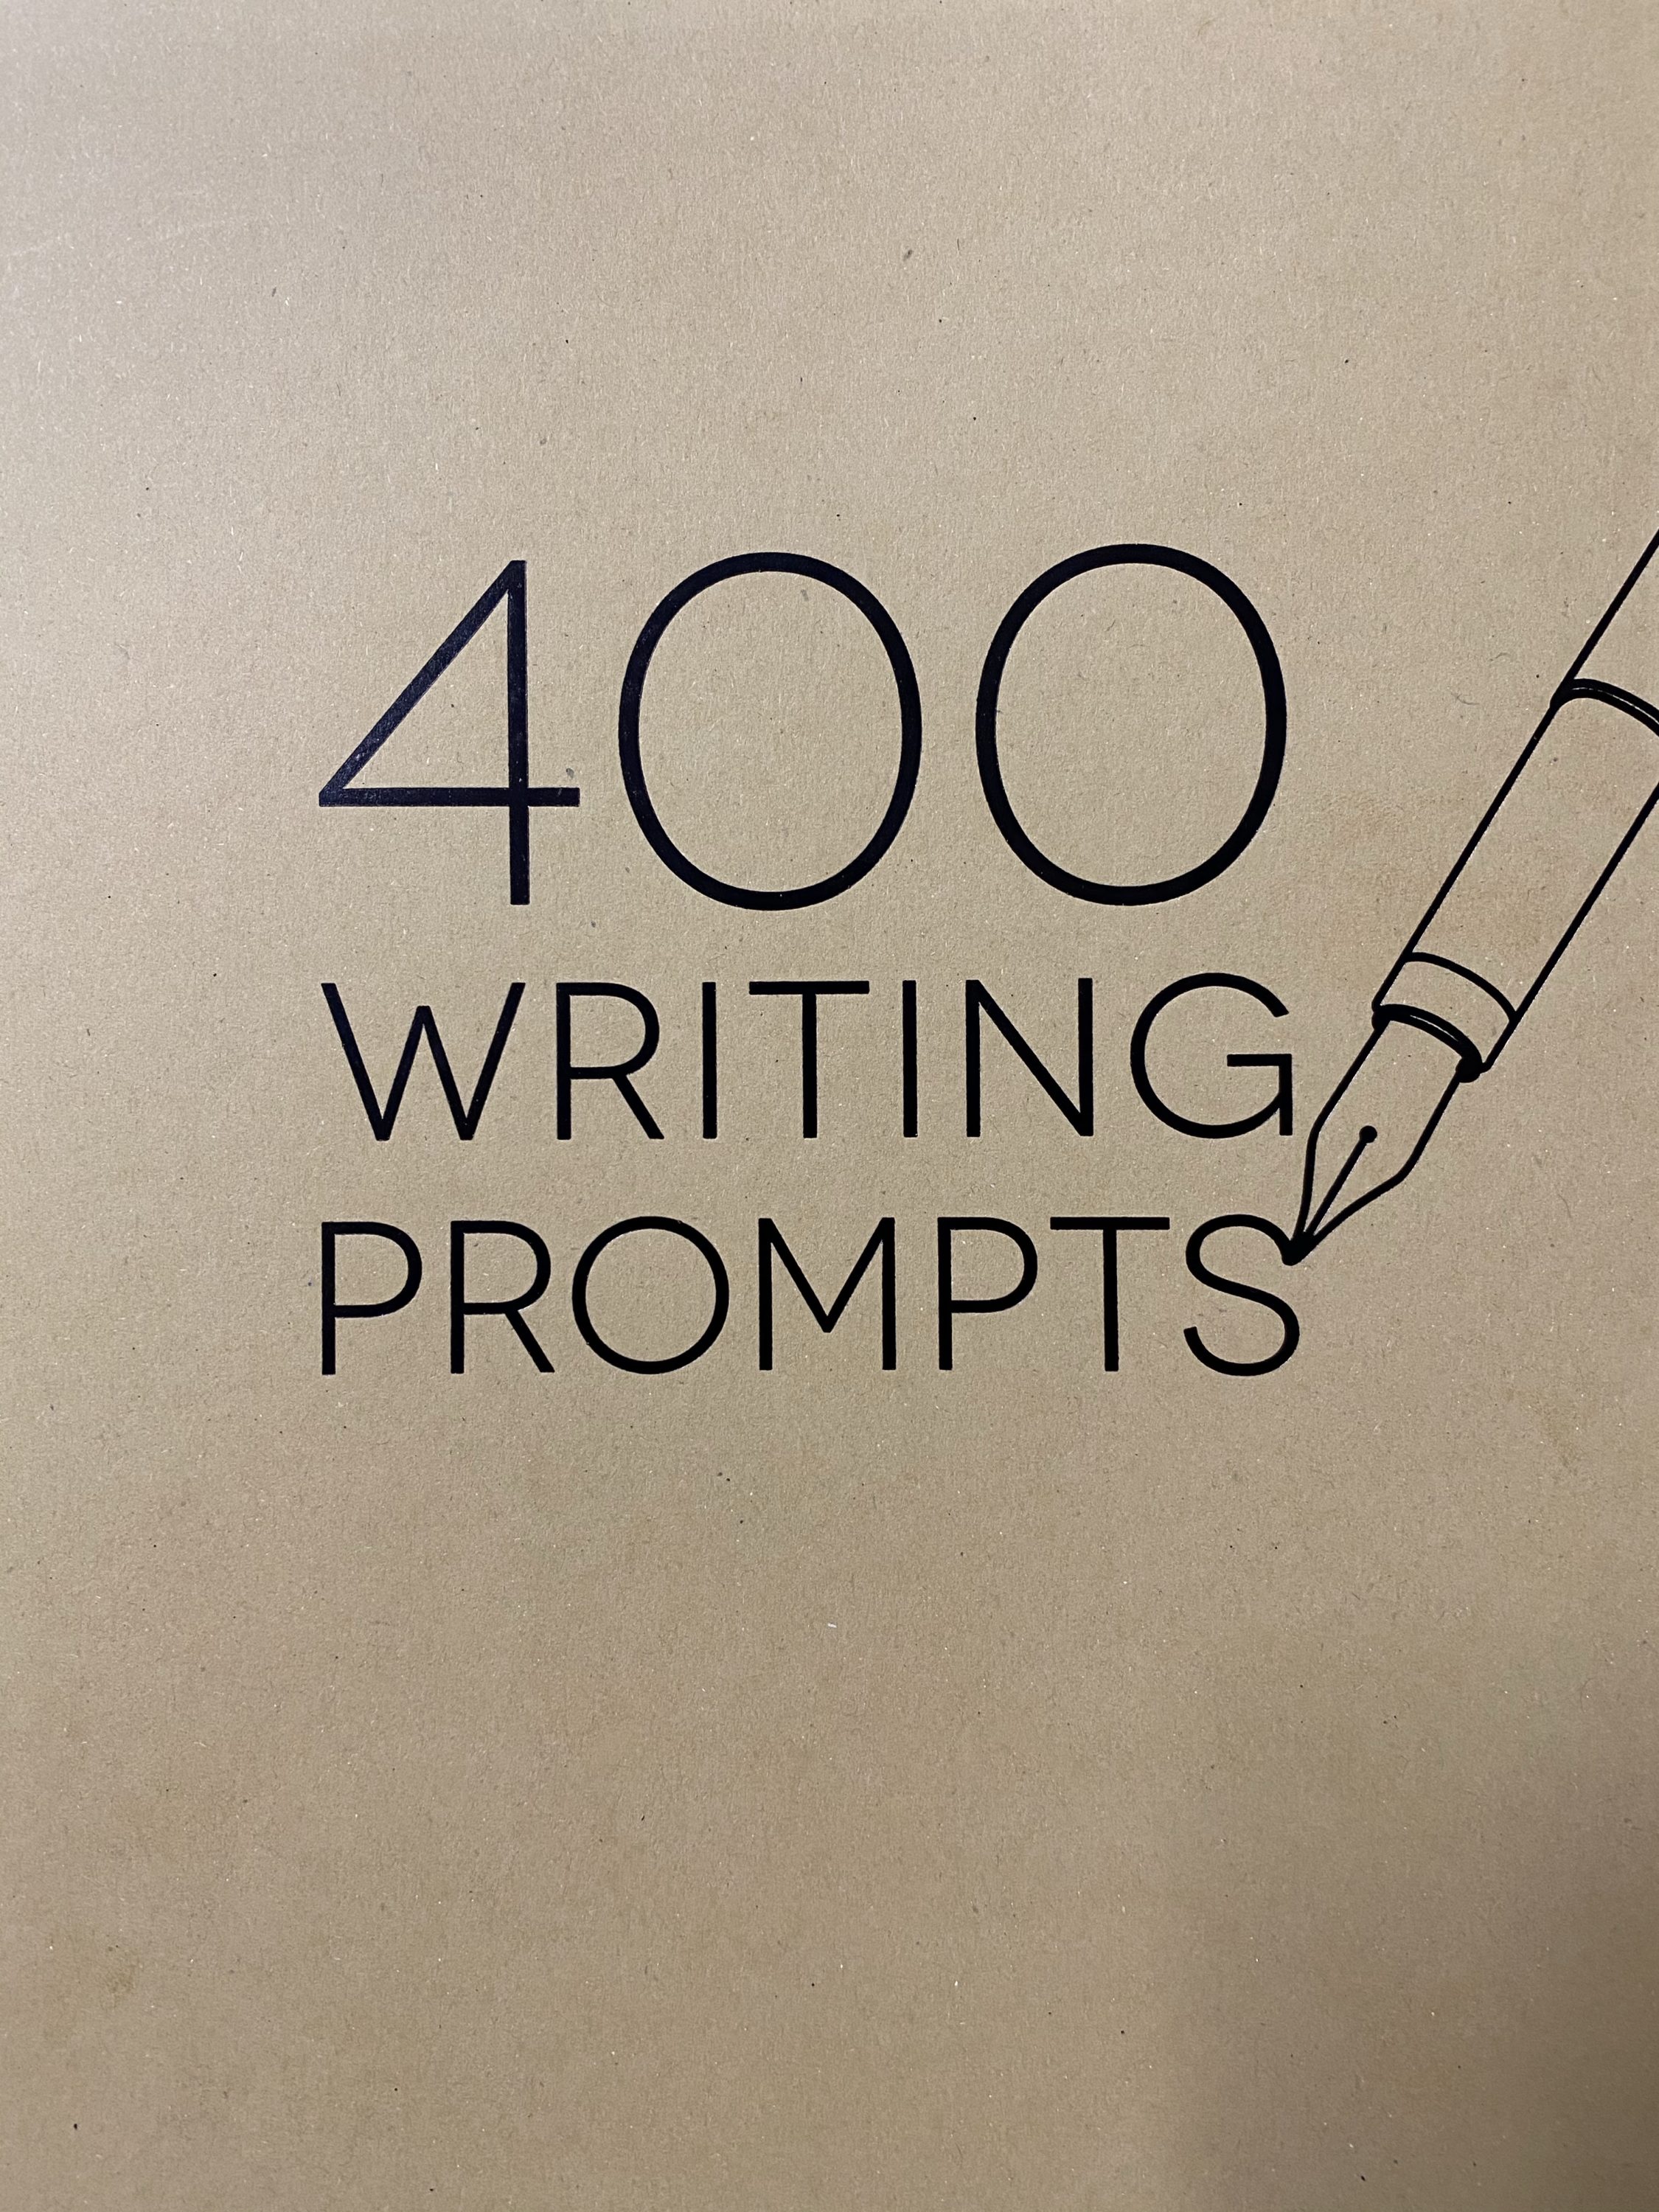 400 Writing Prompts Book - a book that has some writing prompts and areas to write in them. #400WritingPrompts #WritingPrompts